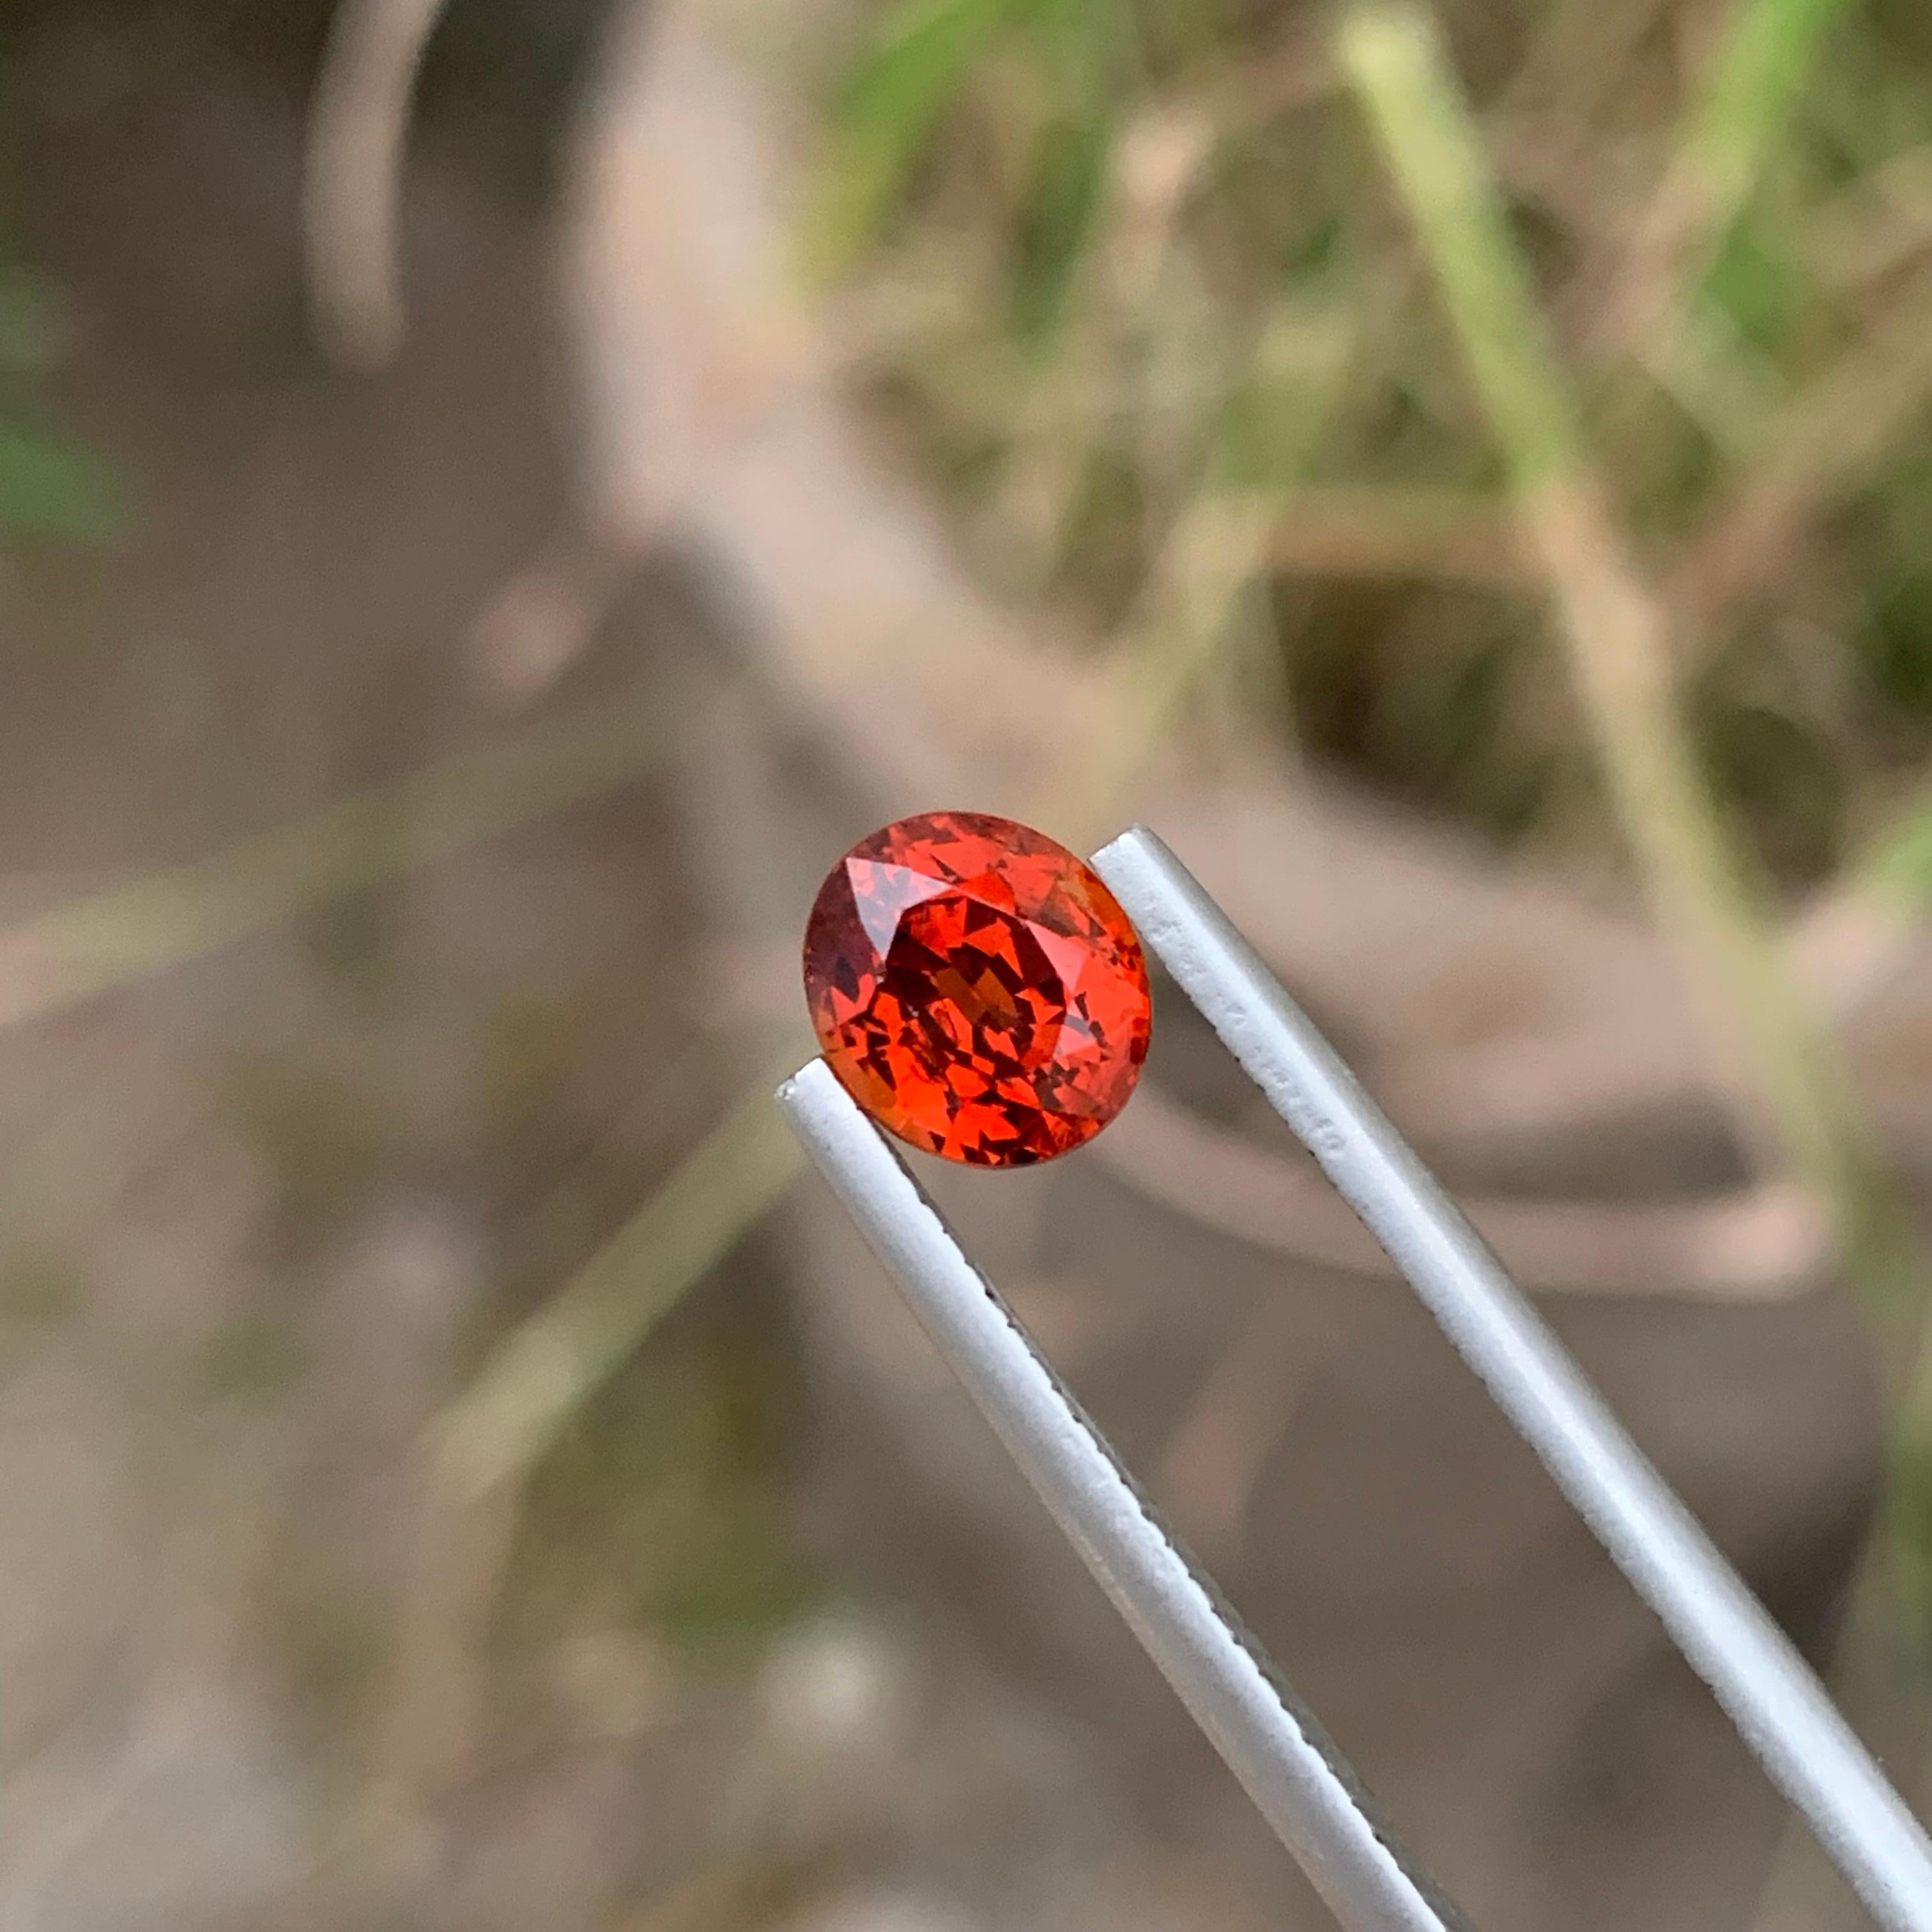 Faceted Spessartine Garnet
Weight: 2.20 Carats 
Dimension: 7.3x6.4x5.3 Mm
Origin: Madagascar Africa 
Shape: Oval
Color: Orange
Treatment: Non
Certificate; On Client Demand
Spessartine garnet, also known simply as spessartine, is a striking and